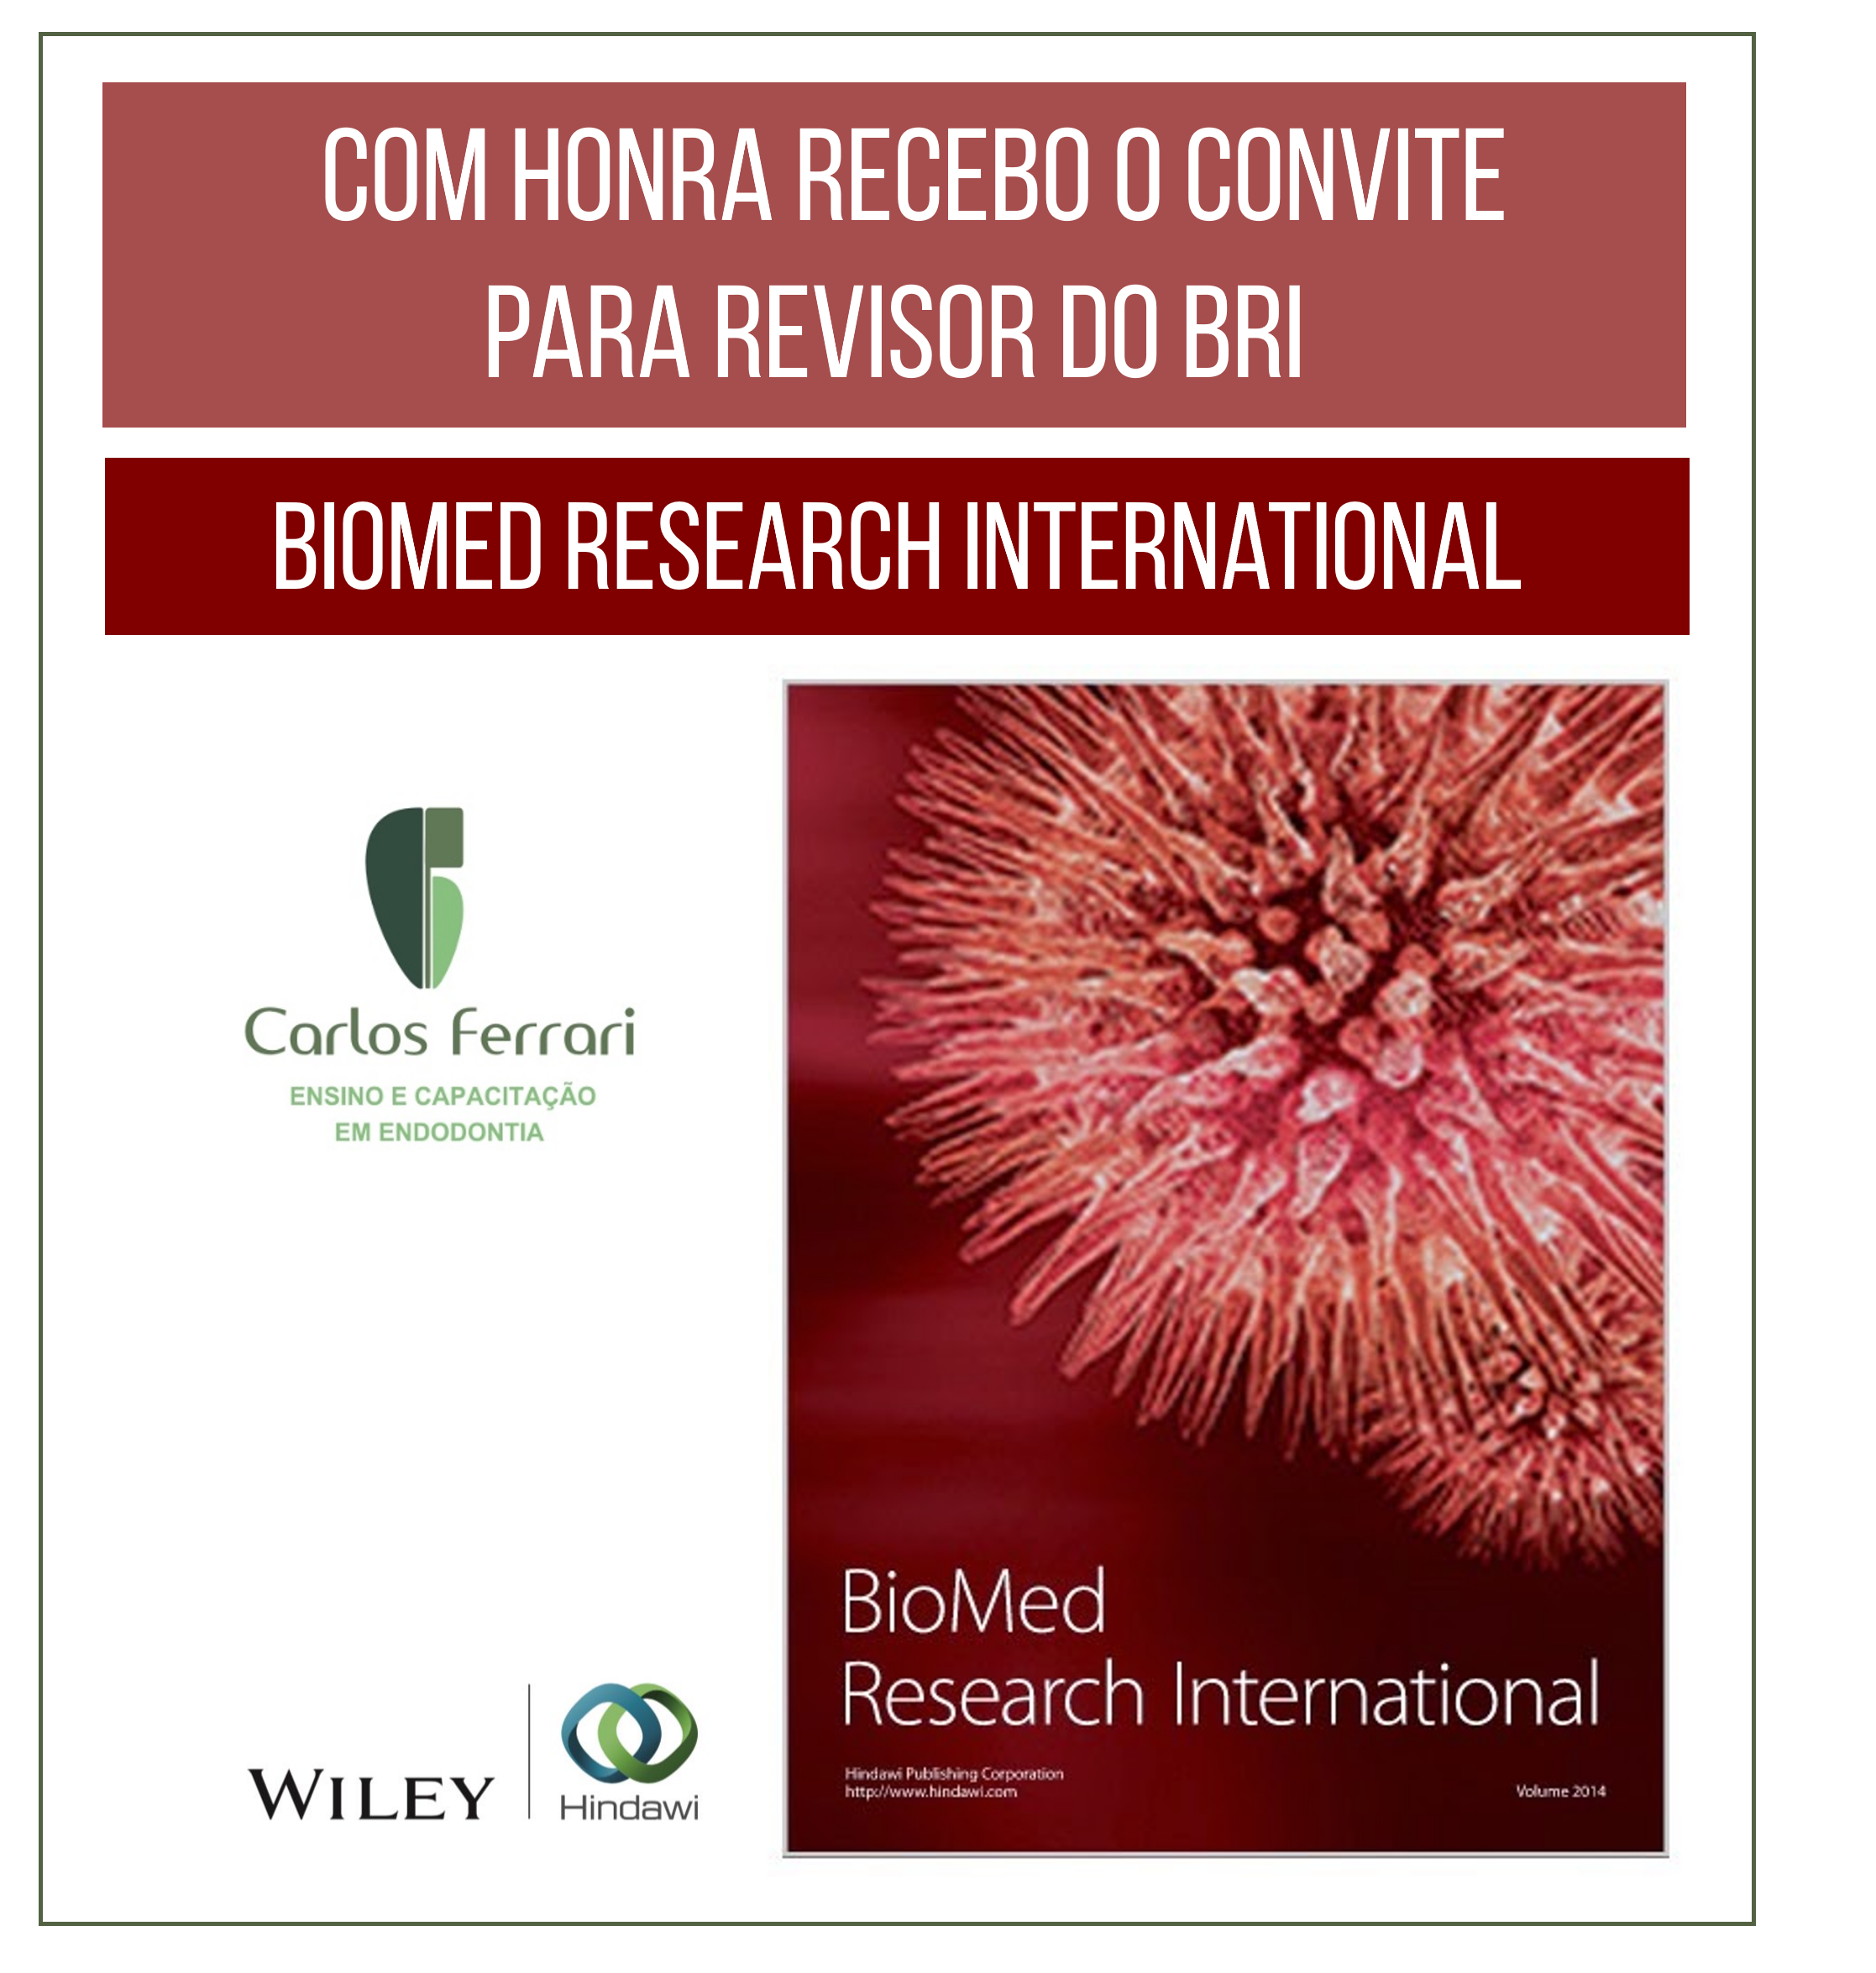 You are currently viewing Convite para revisor do Biomedic Research International